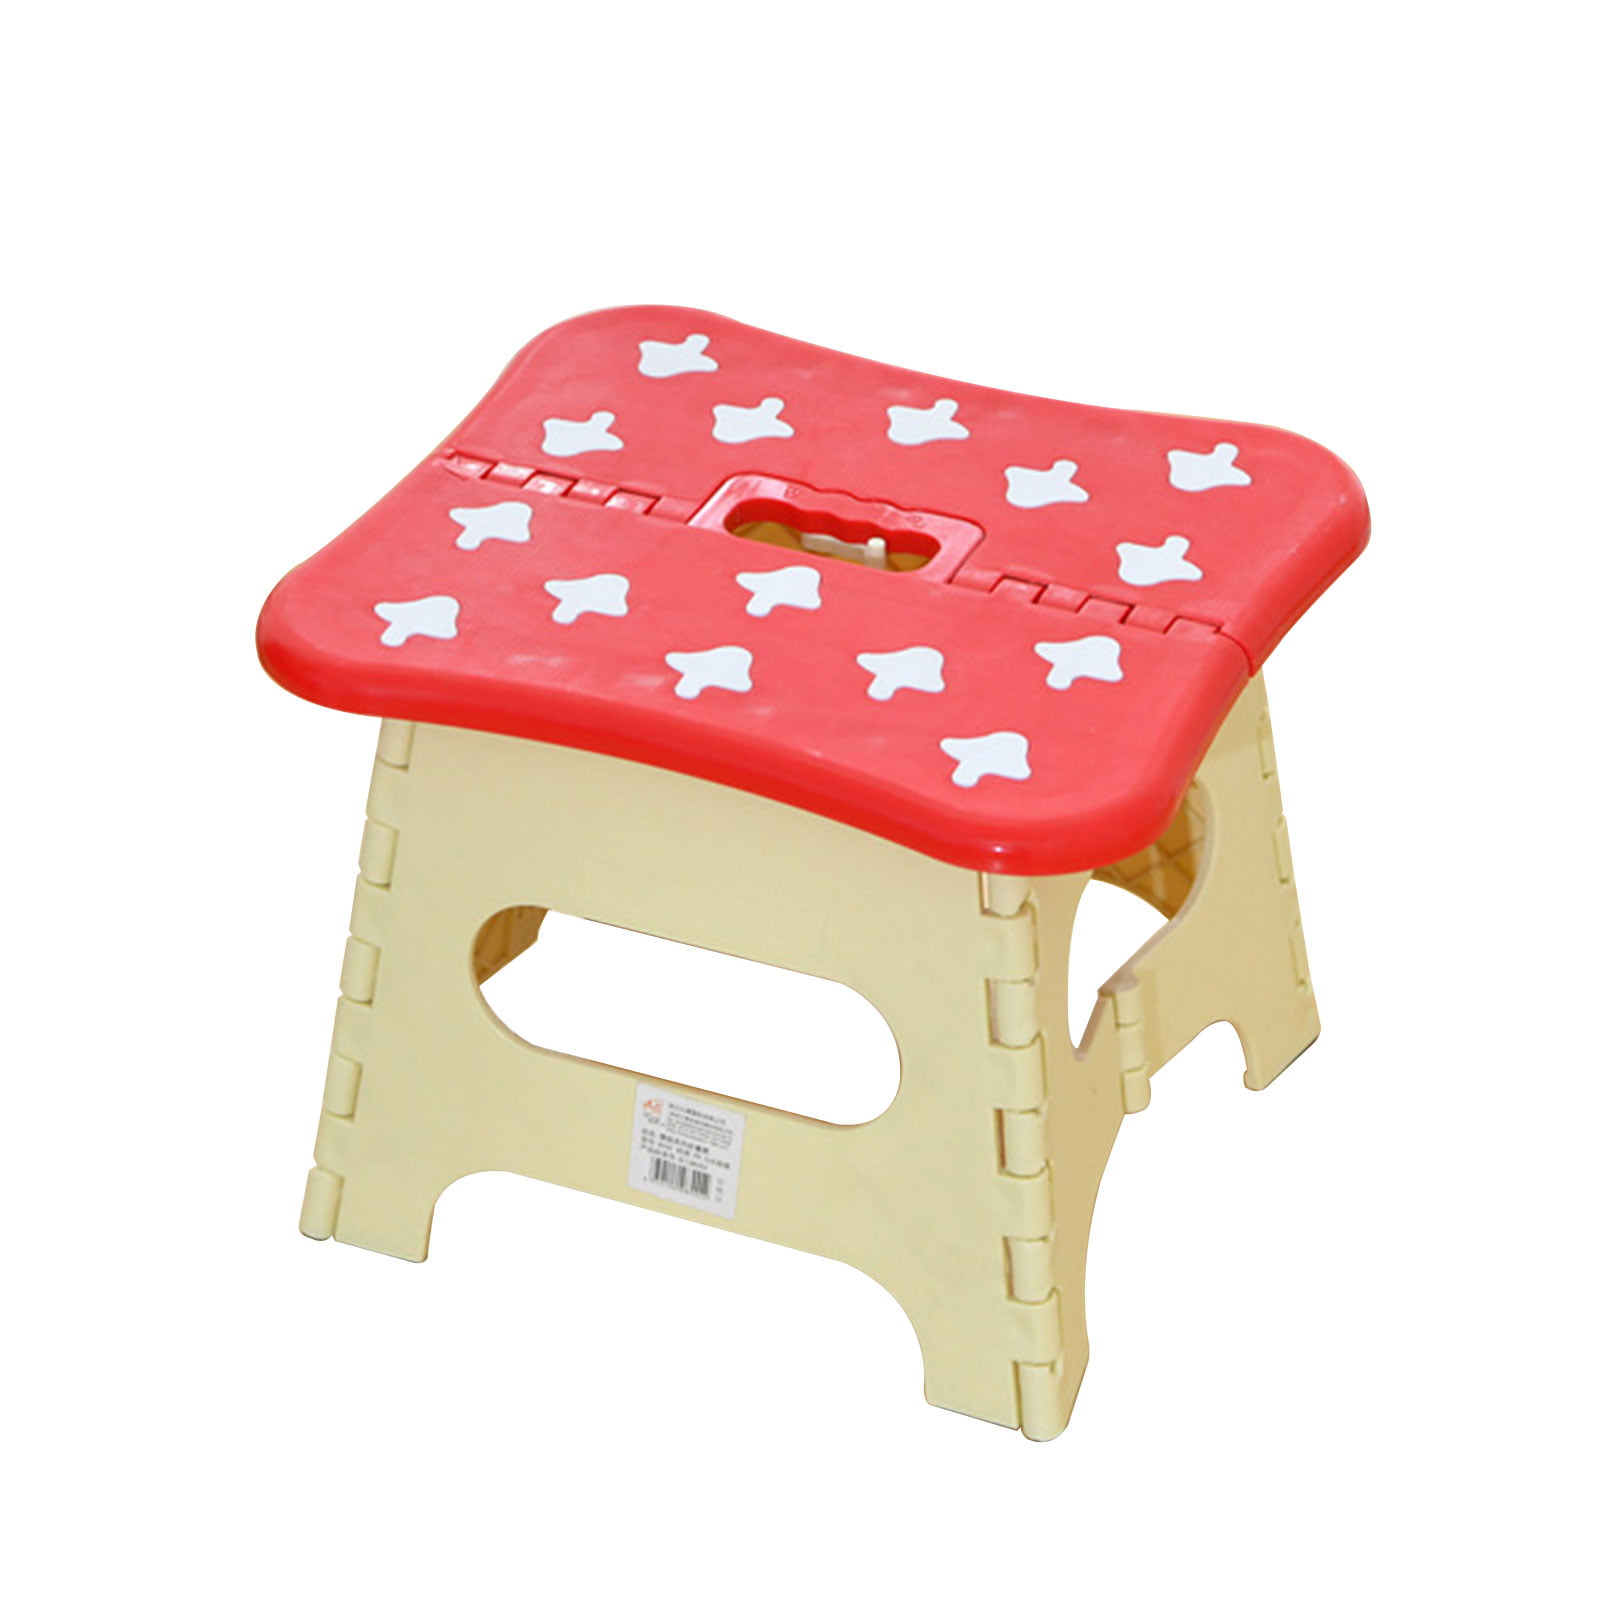 Heavy Duty Step up Stool Camping Kitchen Stores. Folding Fishing 